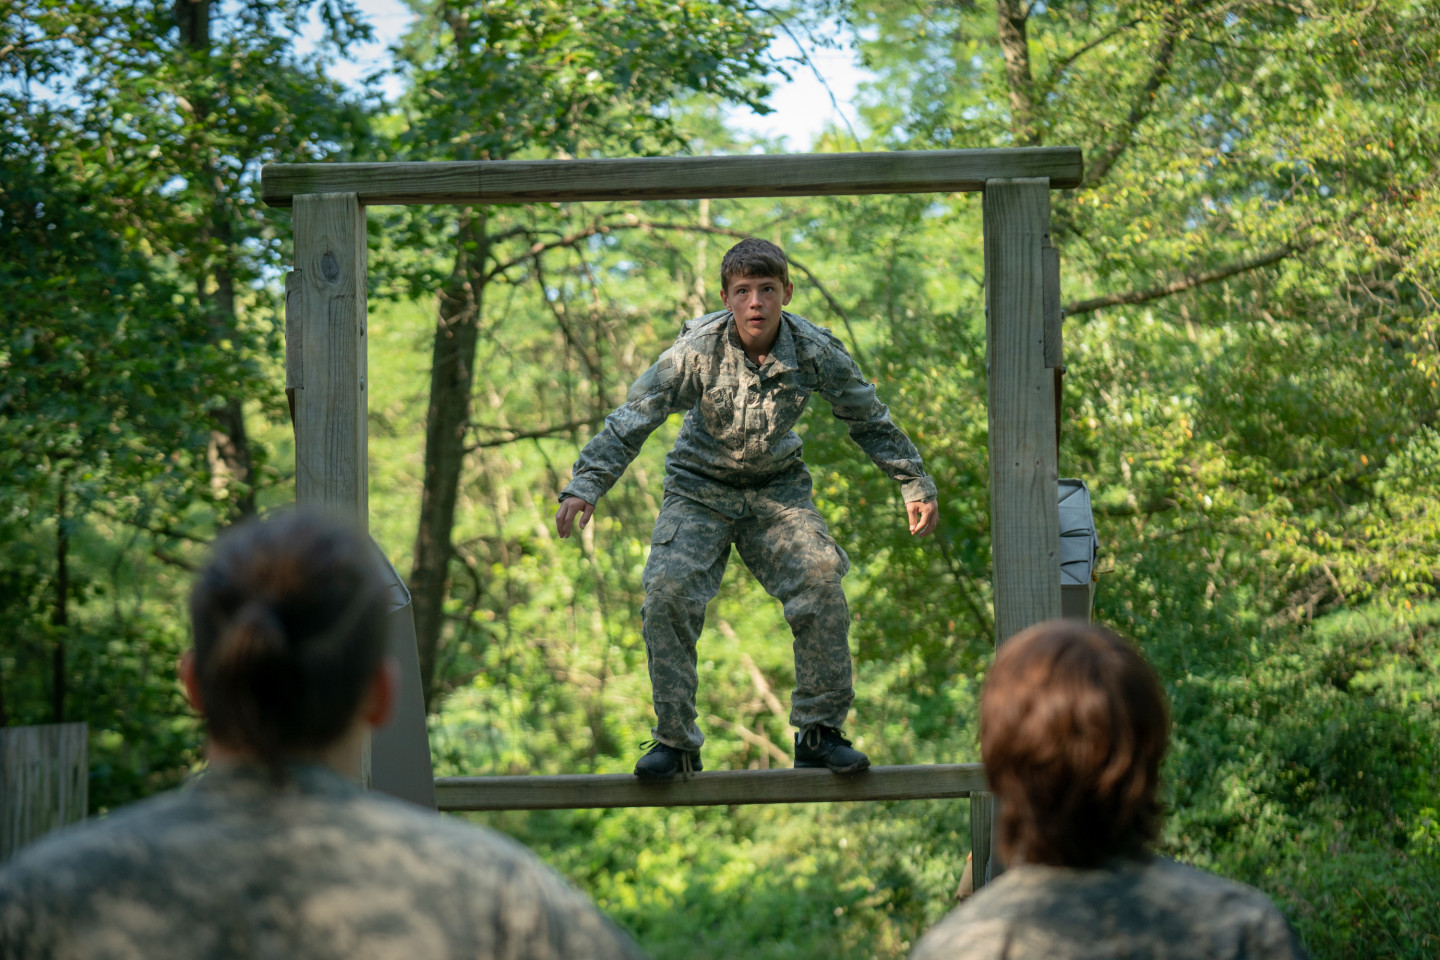 A teenager in Army fatigues stands in a wooden frame on an obstacle course.